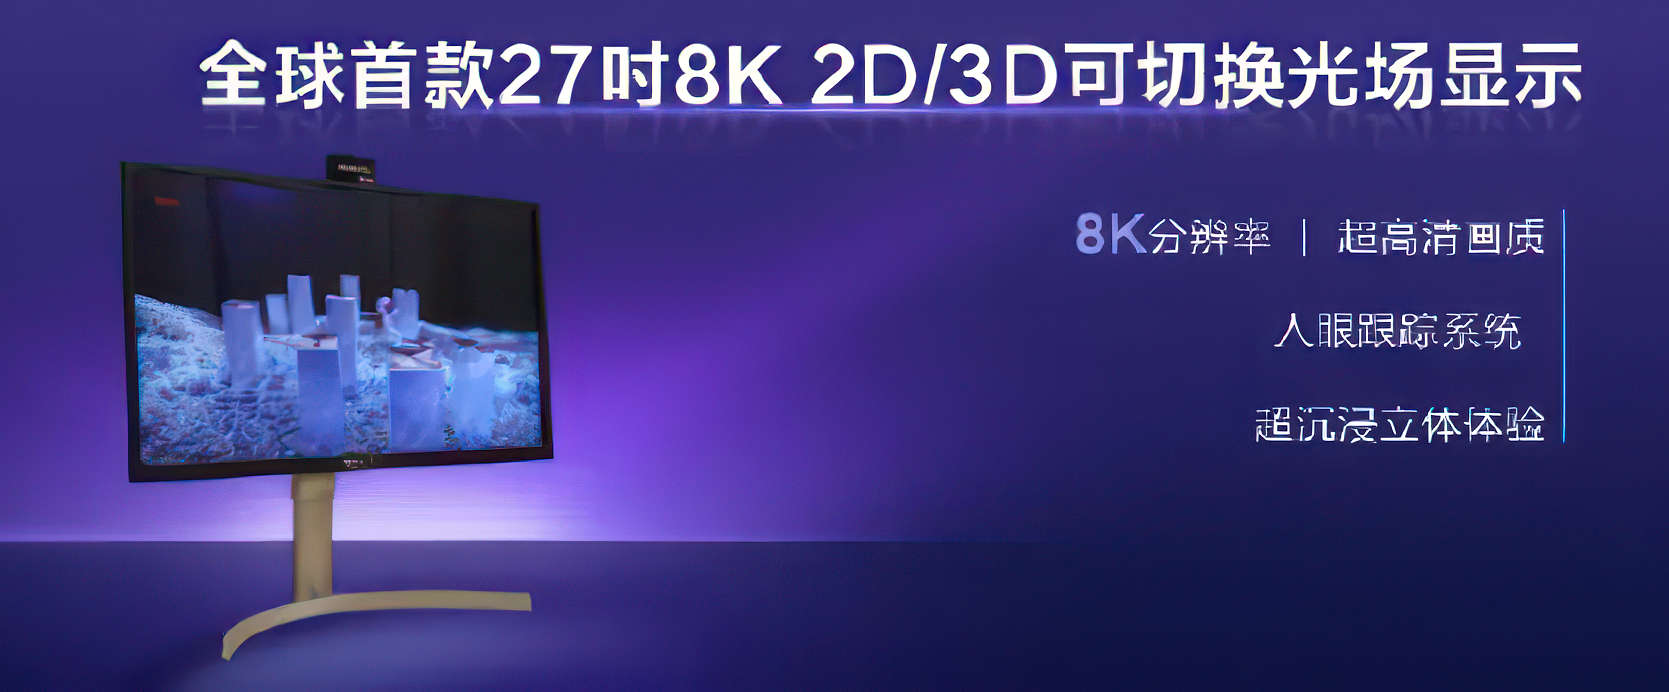 TCL teases dome-shaped 4K 120Hz OLED panel for PC monitors 